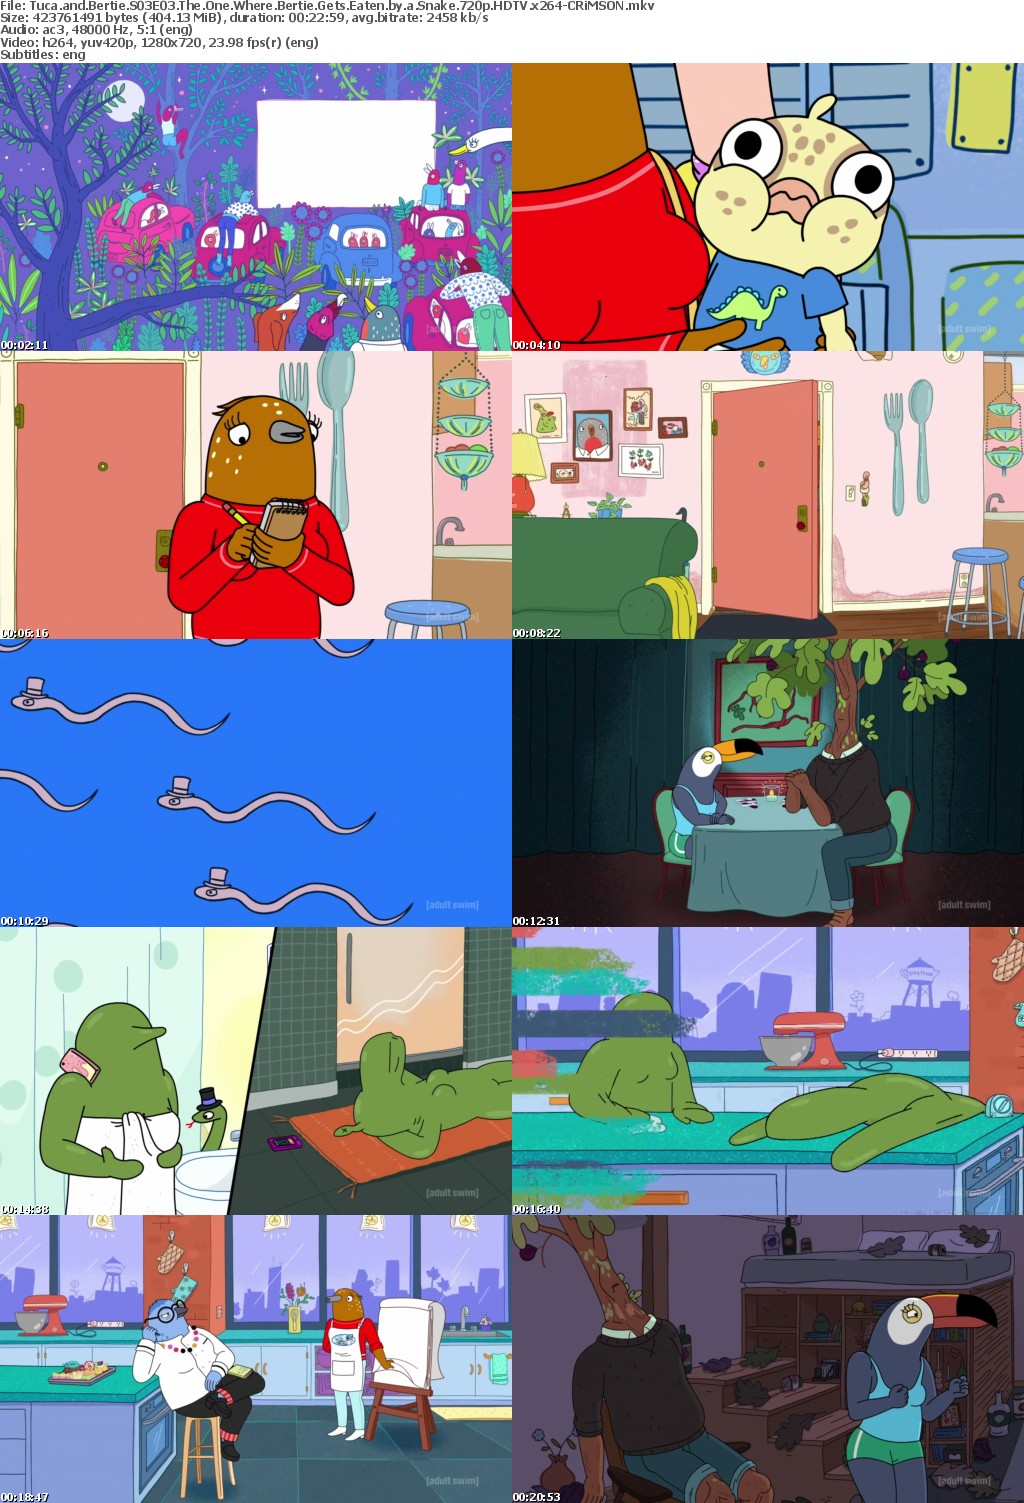 Tuca and Bertie S03E03 The One Where Bertie Gets Eaten by a Snake 720p HDTV x264-CRiMSON